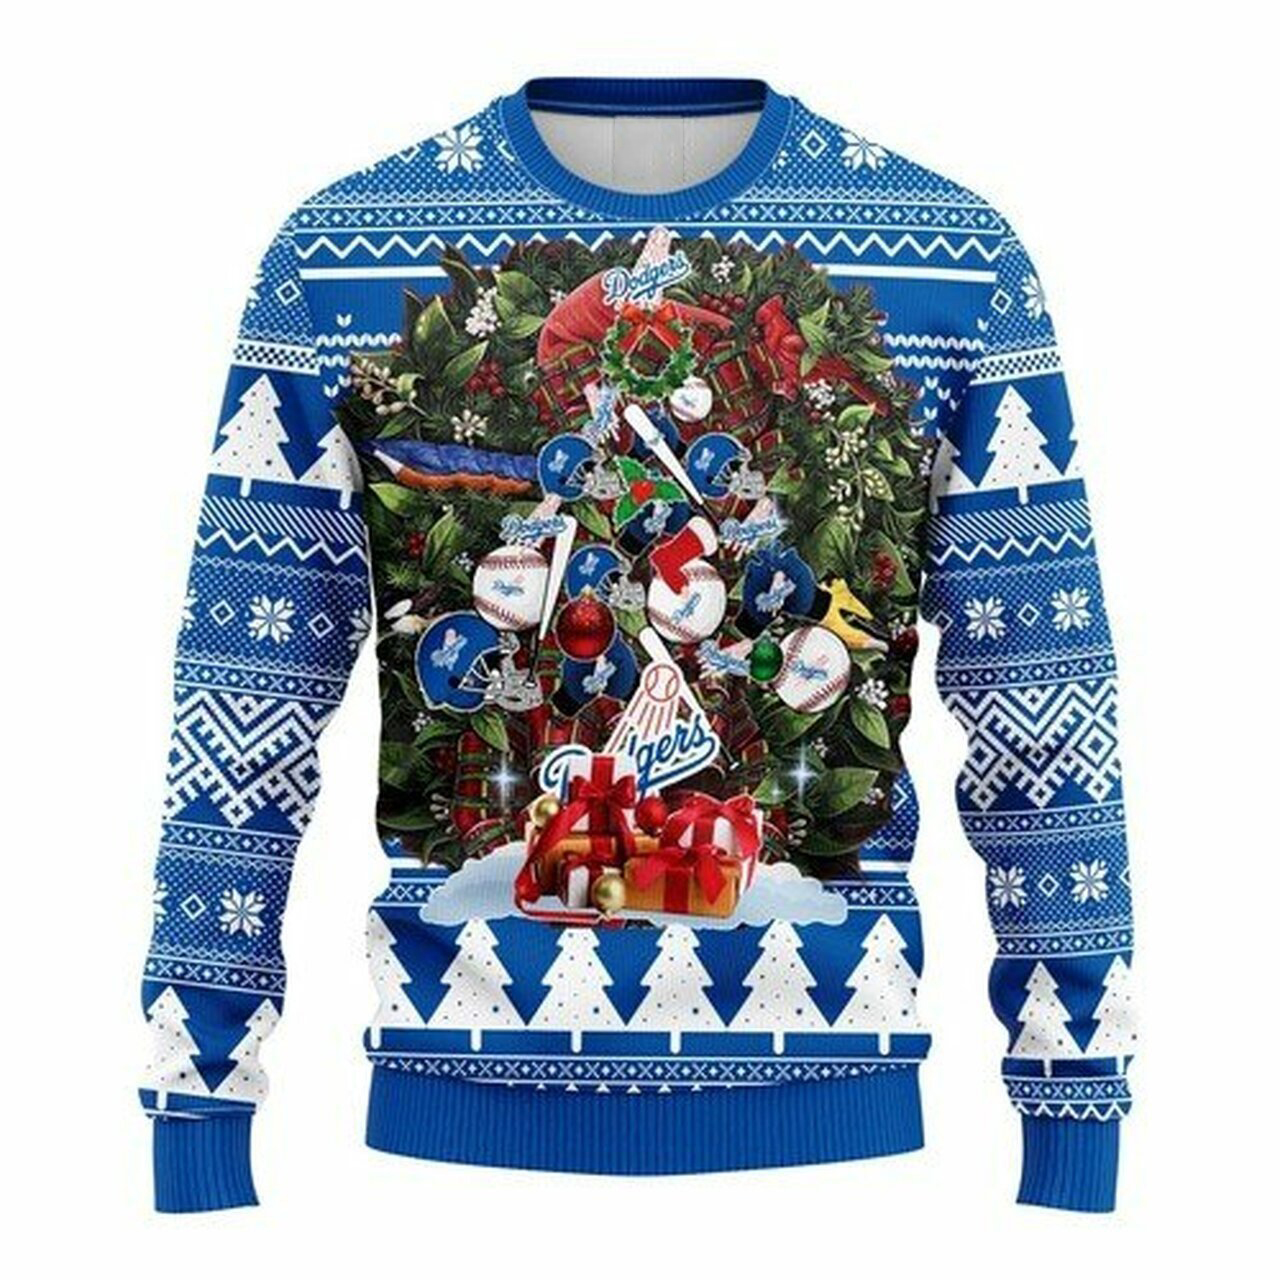 MLB Los Angeles Dodgers christmas tree ugly sweater